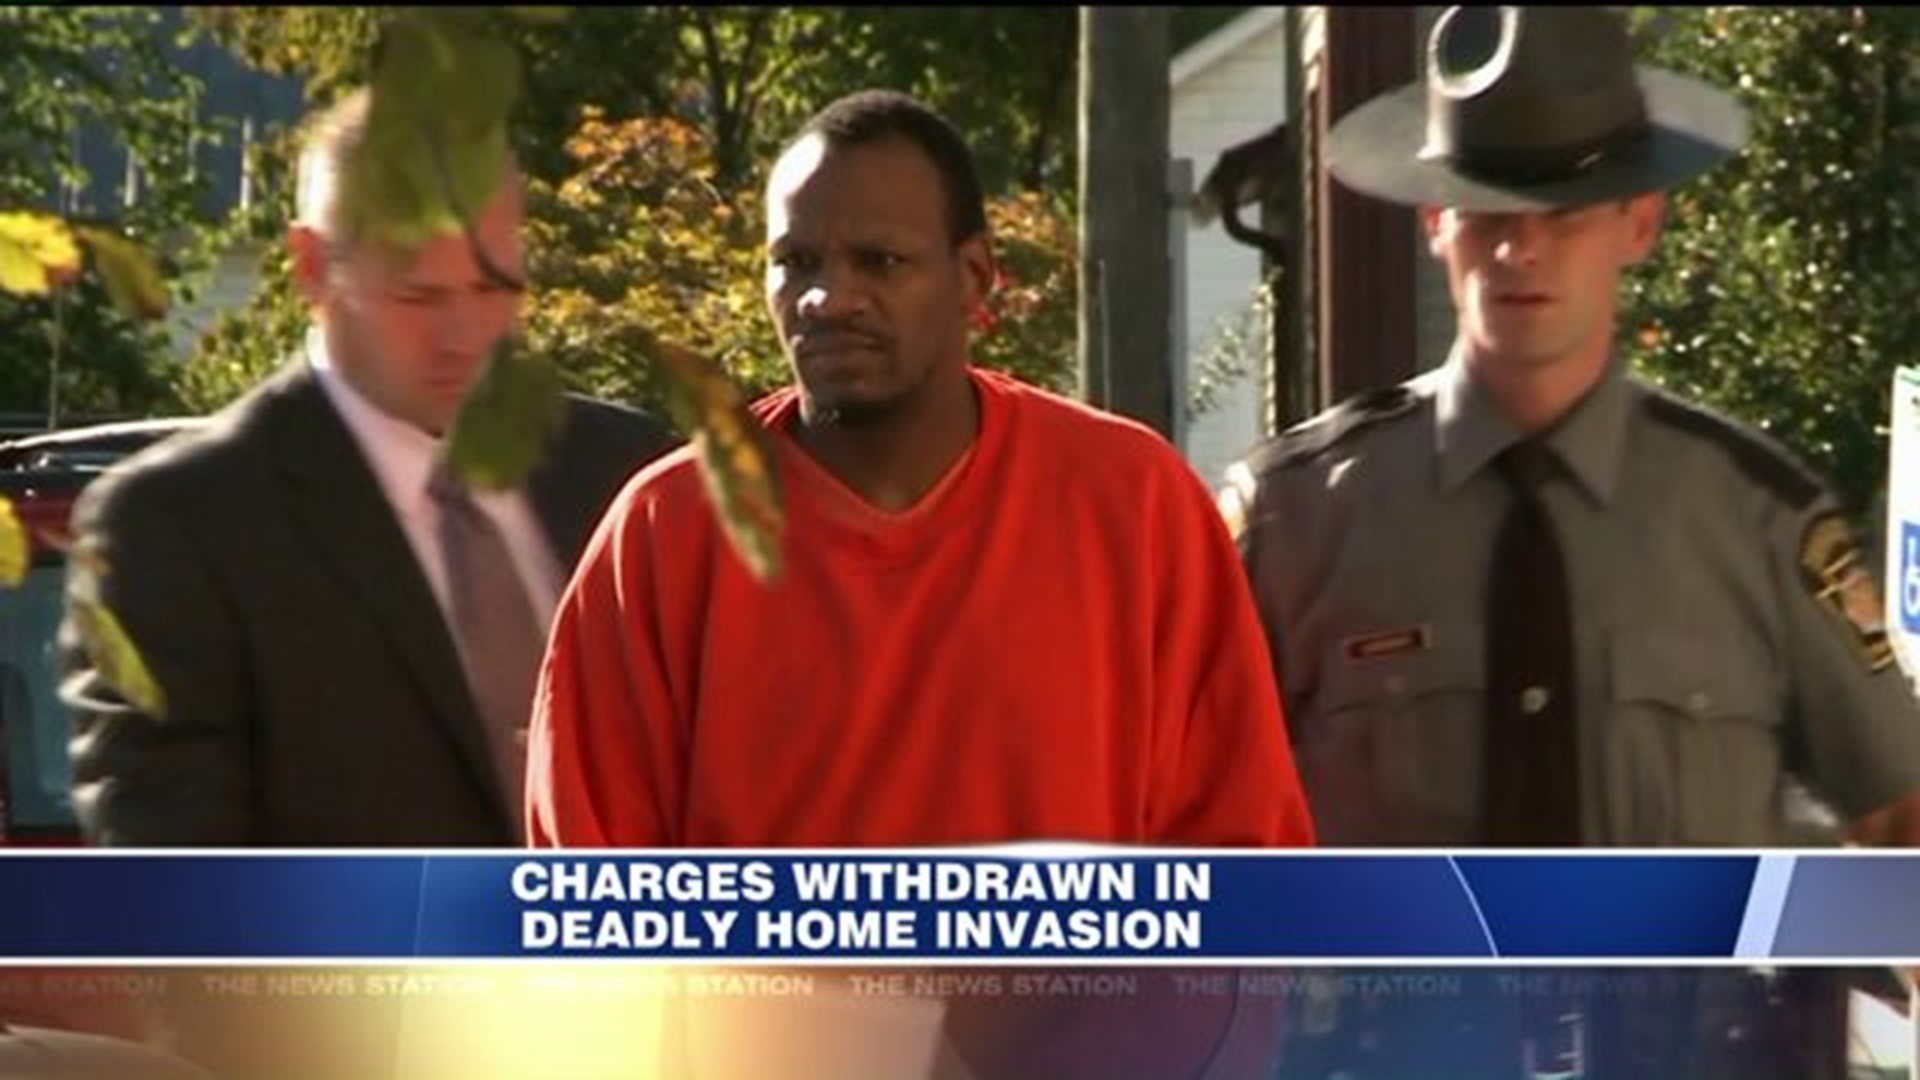 Charges Withdrawn in Deadly Home Invasion